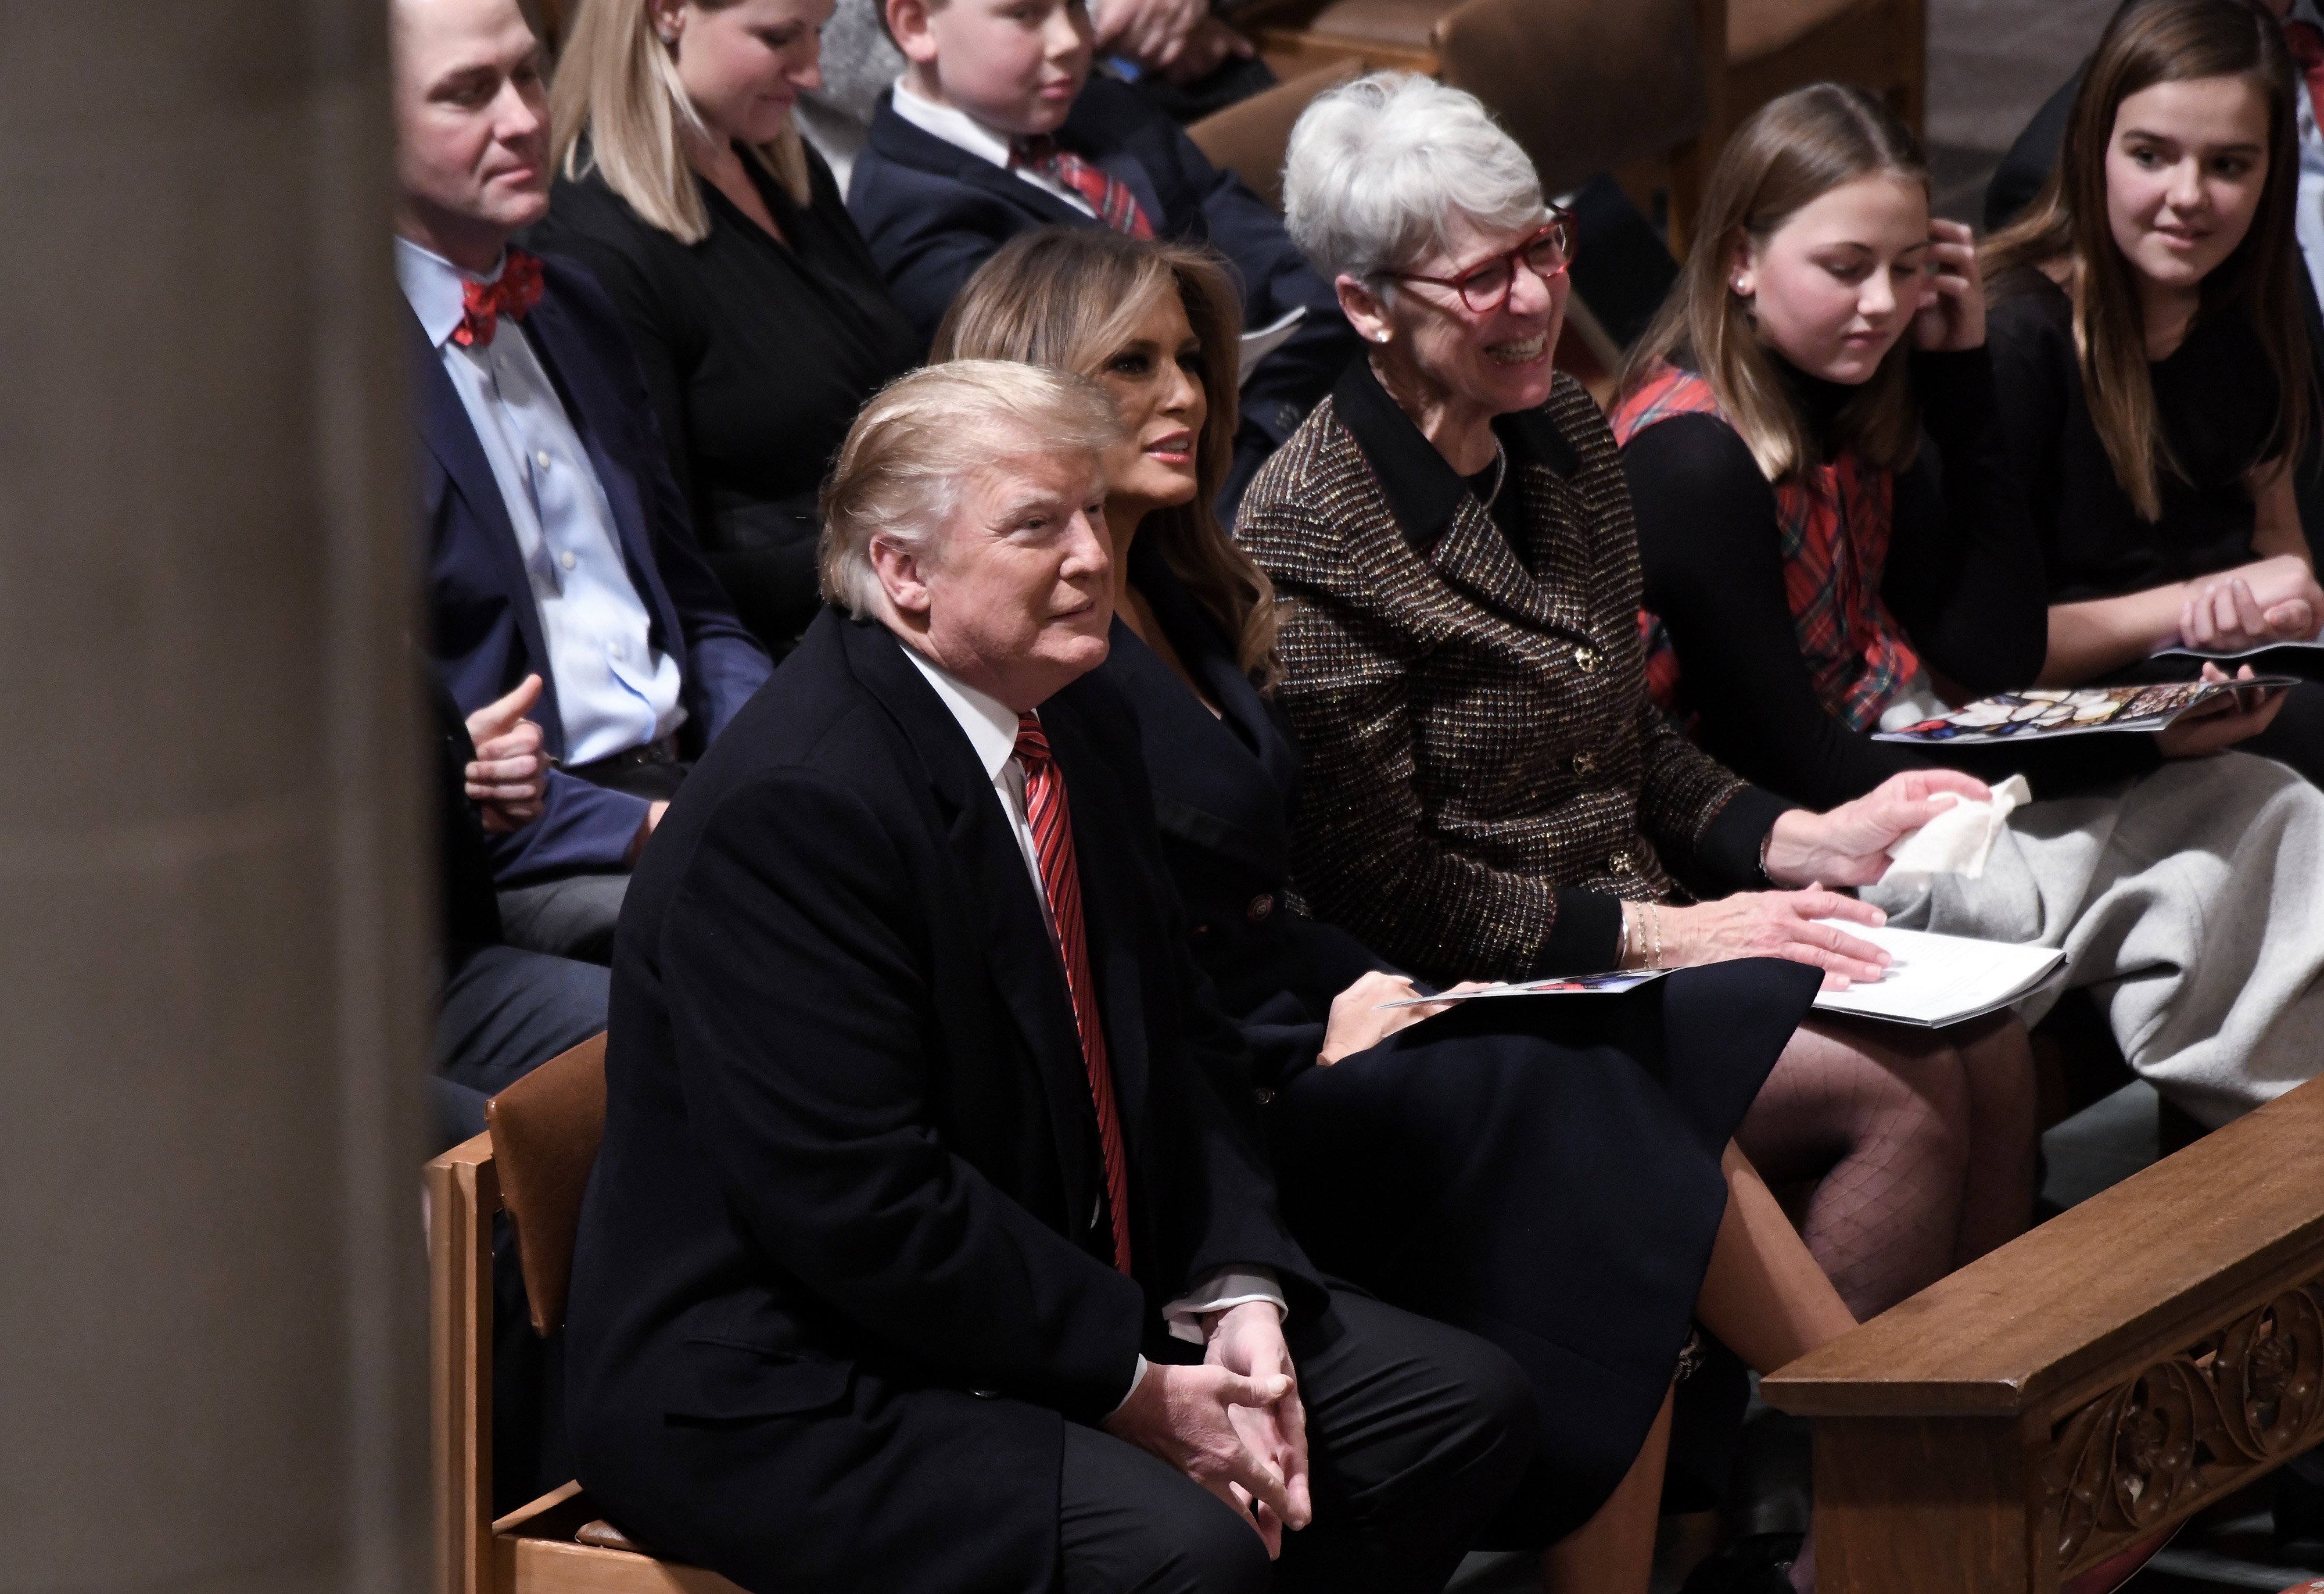 US President Donald Trump and First Lady Melania Trump attending the Christmas Eve service at the National Cathedral in Washington, DC on December 24, 2018. Image credit: Getty/Global Images Ukraine